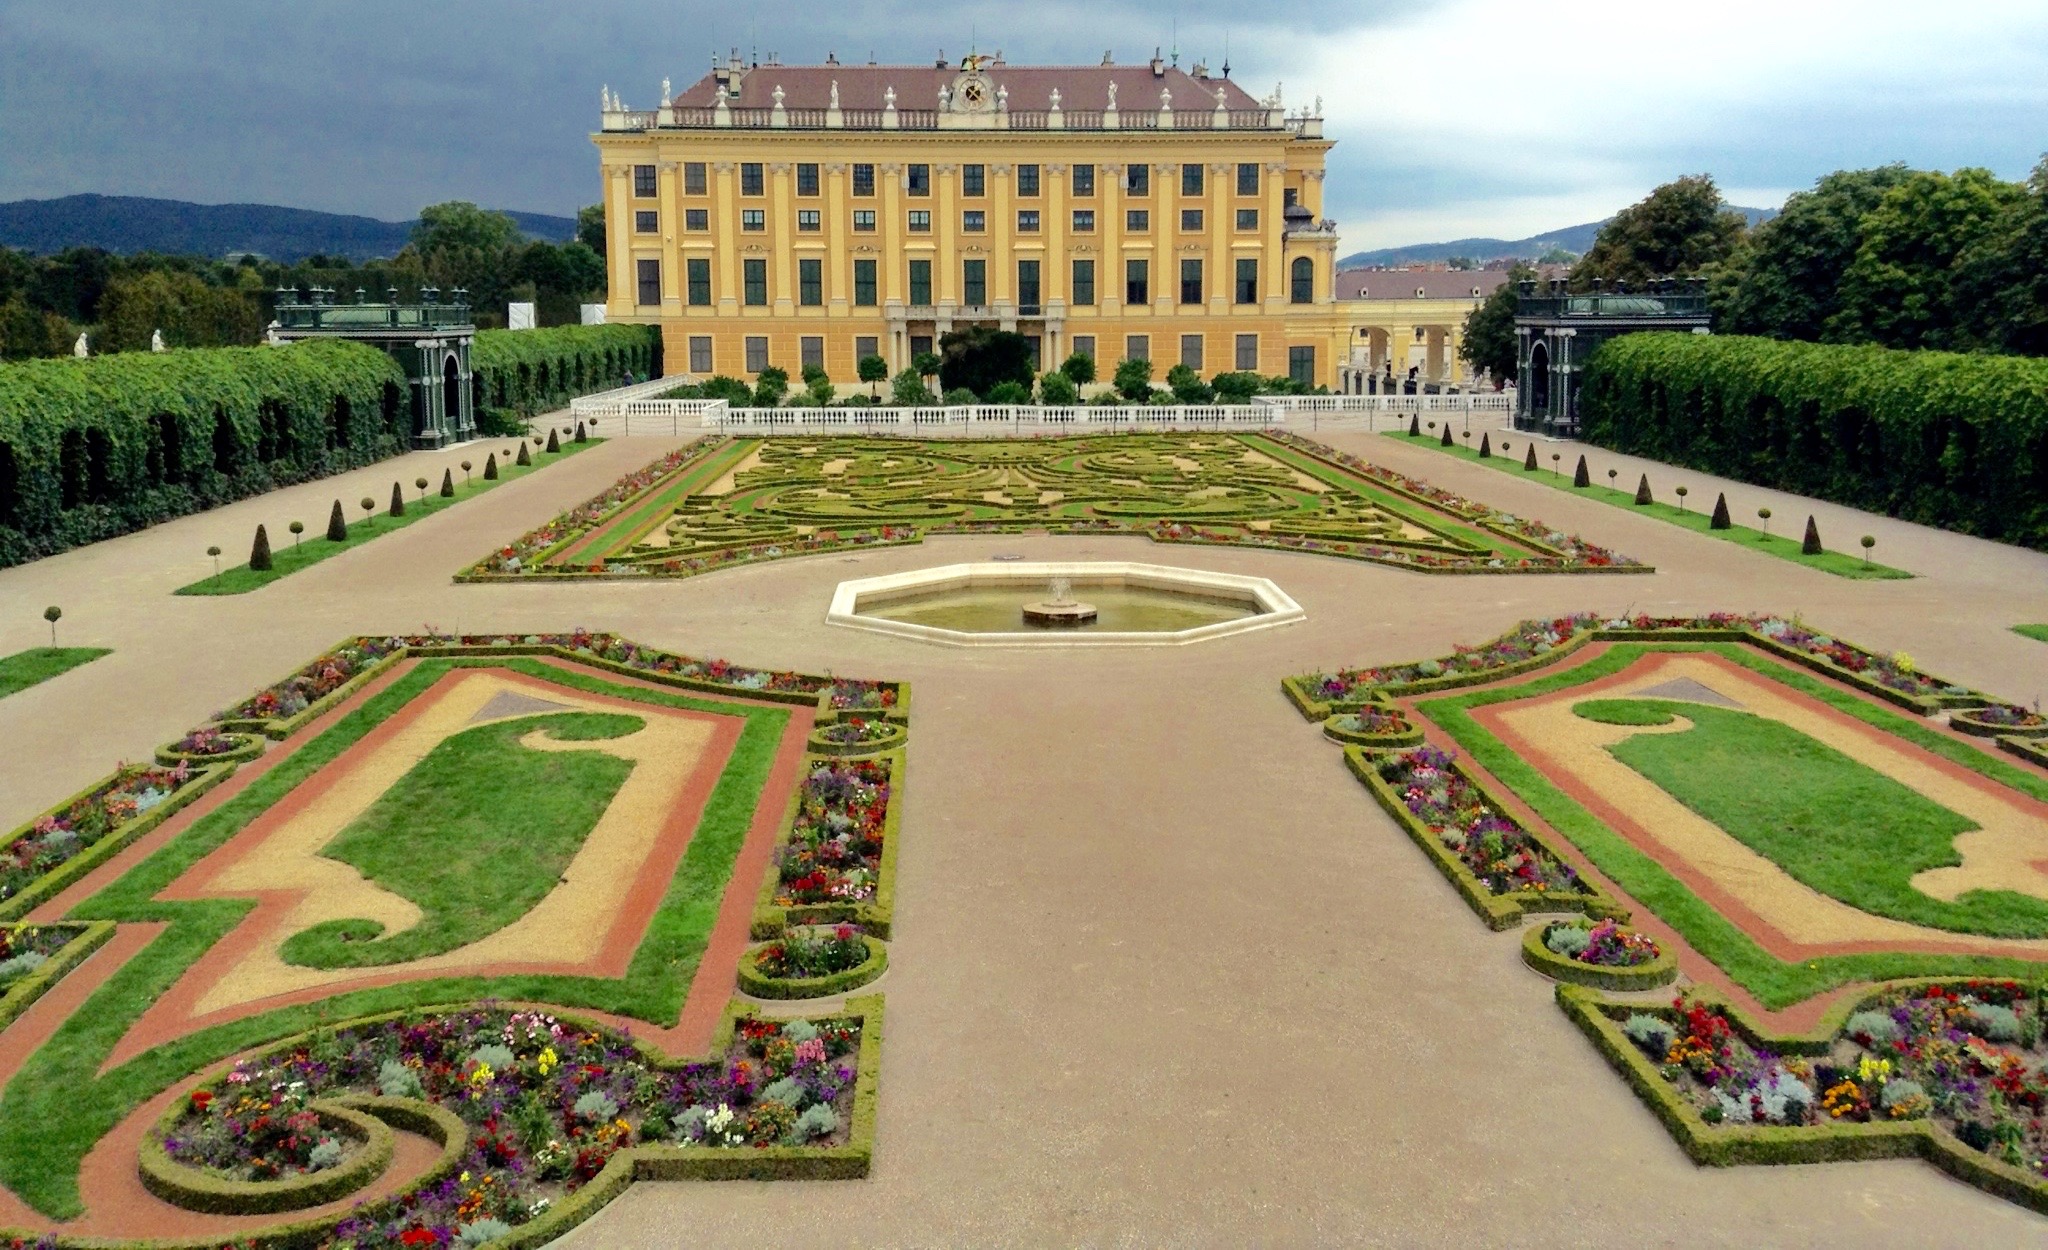 Schönbrunn Palace and formal gardens. Photo by Marla Norman.